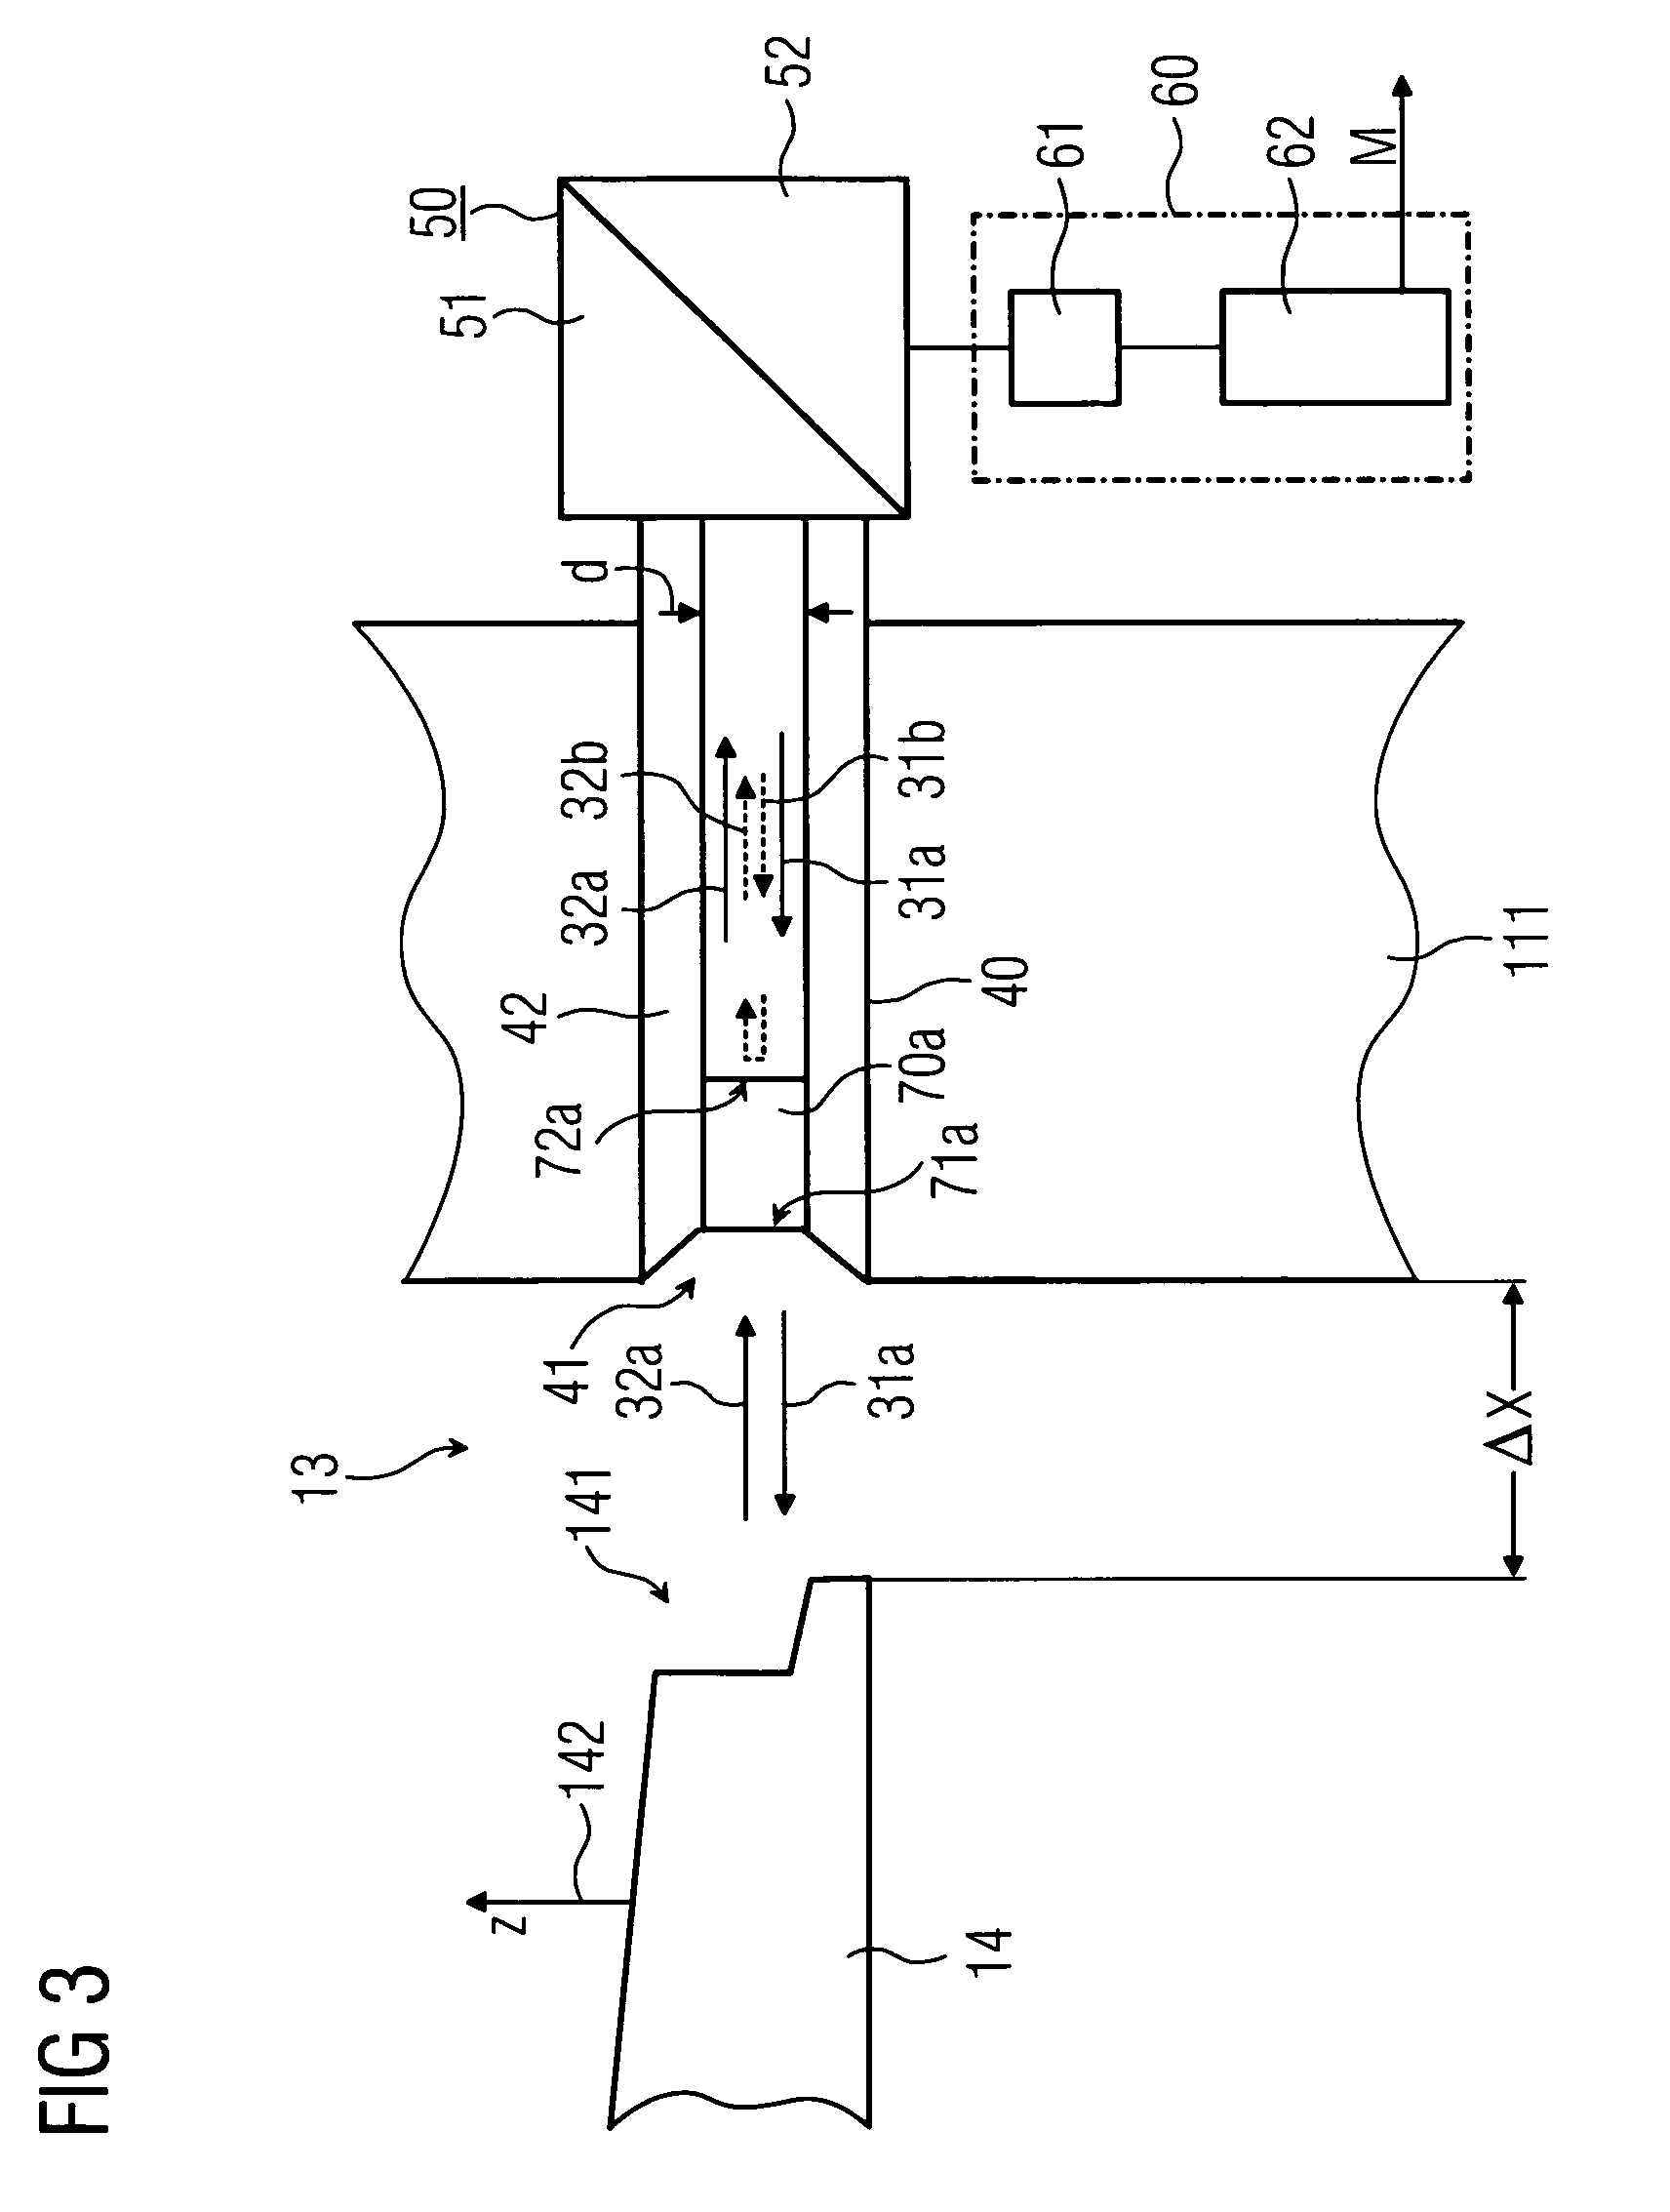 Device for determining the distance between a rotor blade and a wall of a turbine engine surrounding the rotor blade